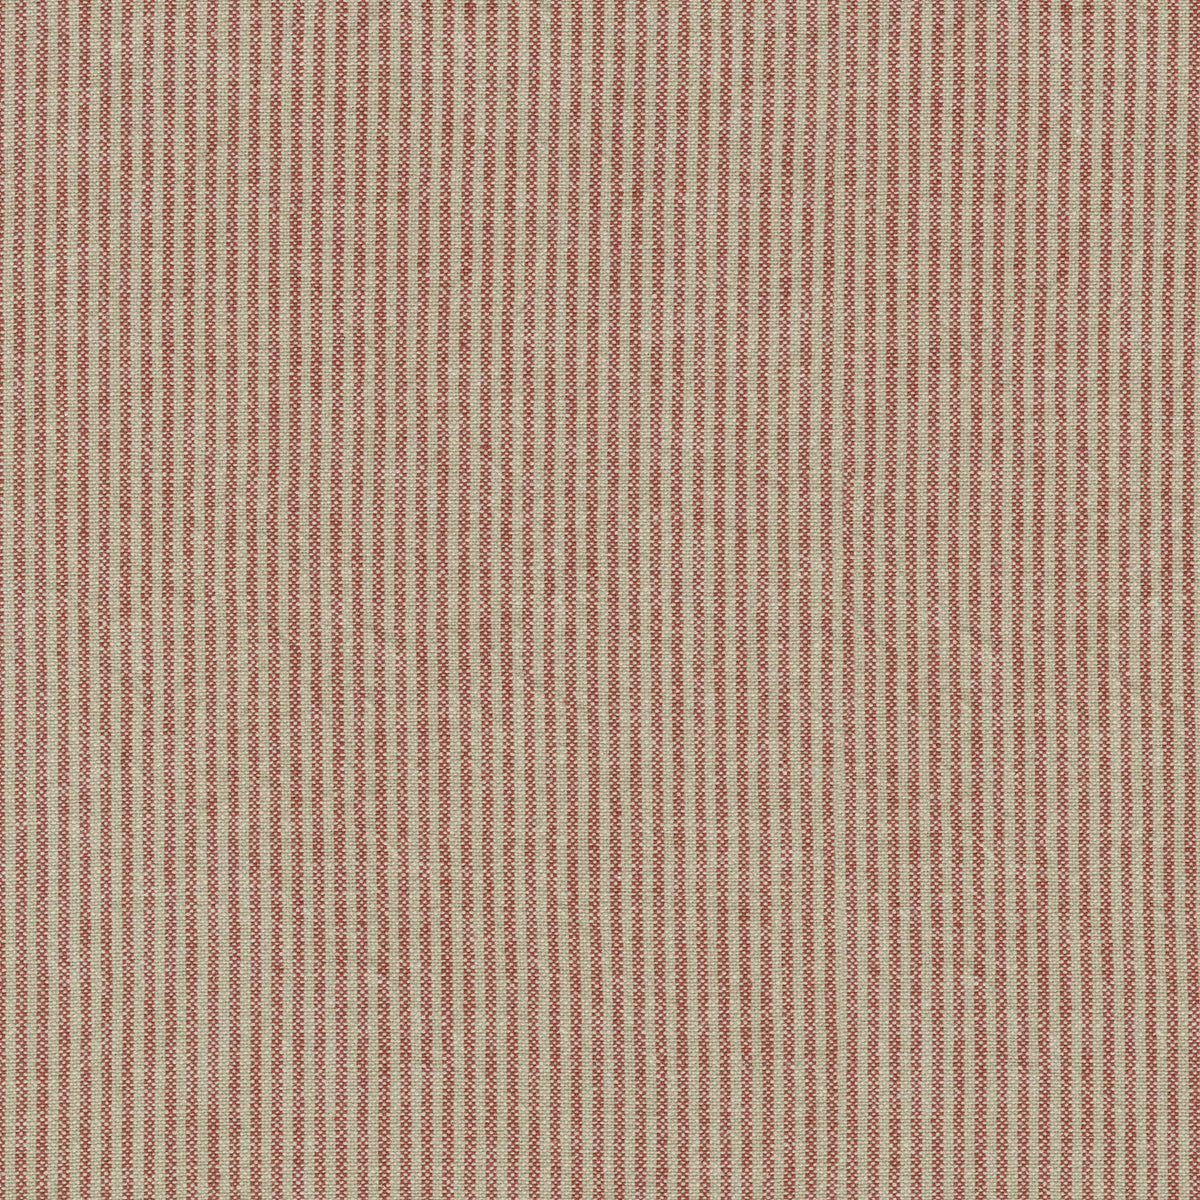 P/K Lifestyles Cullen Ticking - Bayberry 410714 Upholstery Fabric